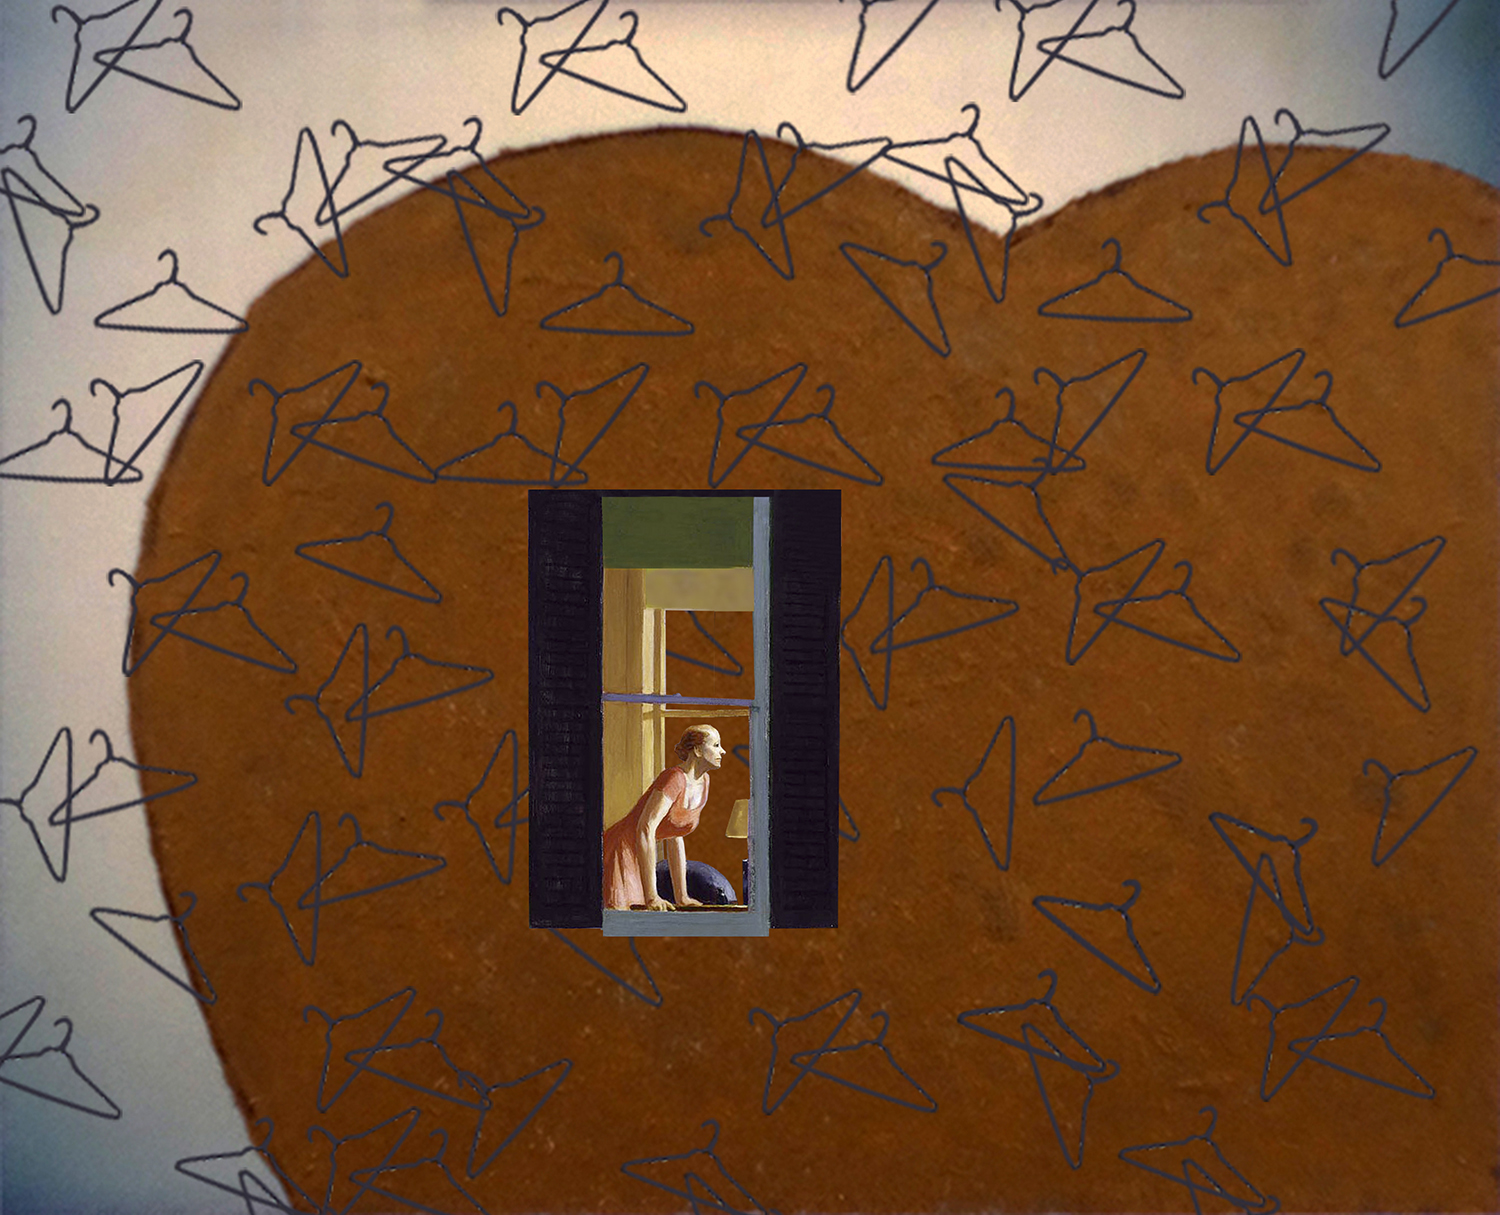 A giant copper-colored heart fills the image. In its center is a window with a window looking through it, while outside it's raining coat hangers everywhere.